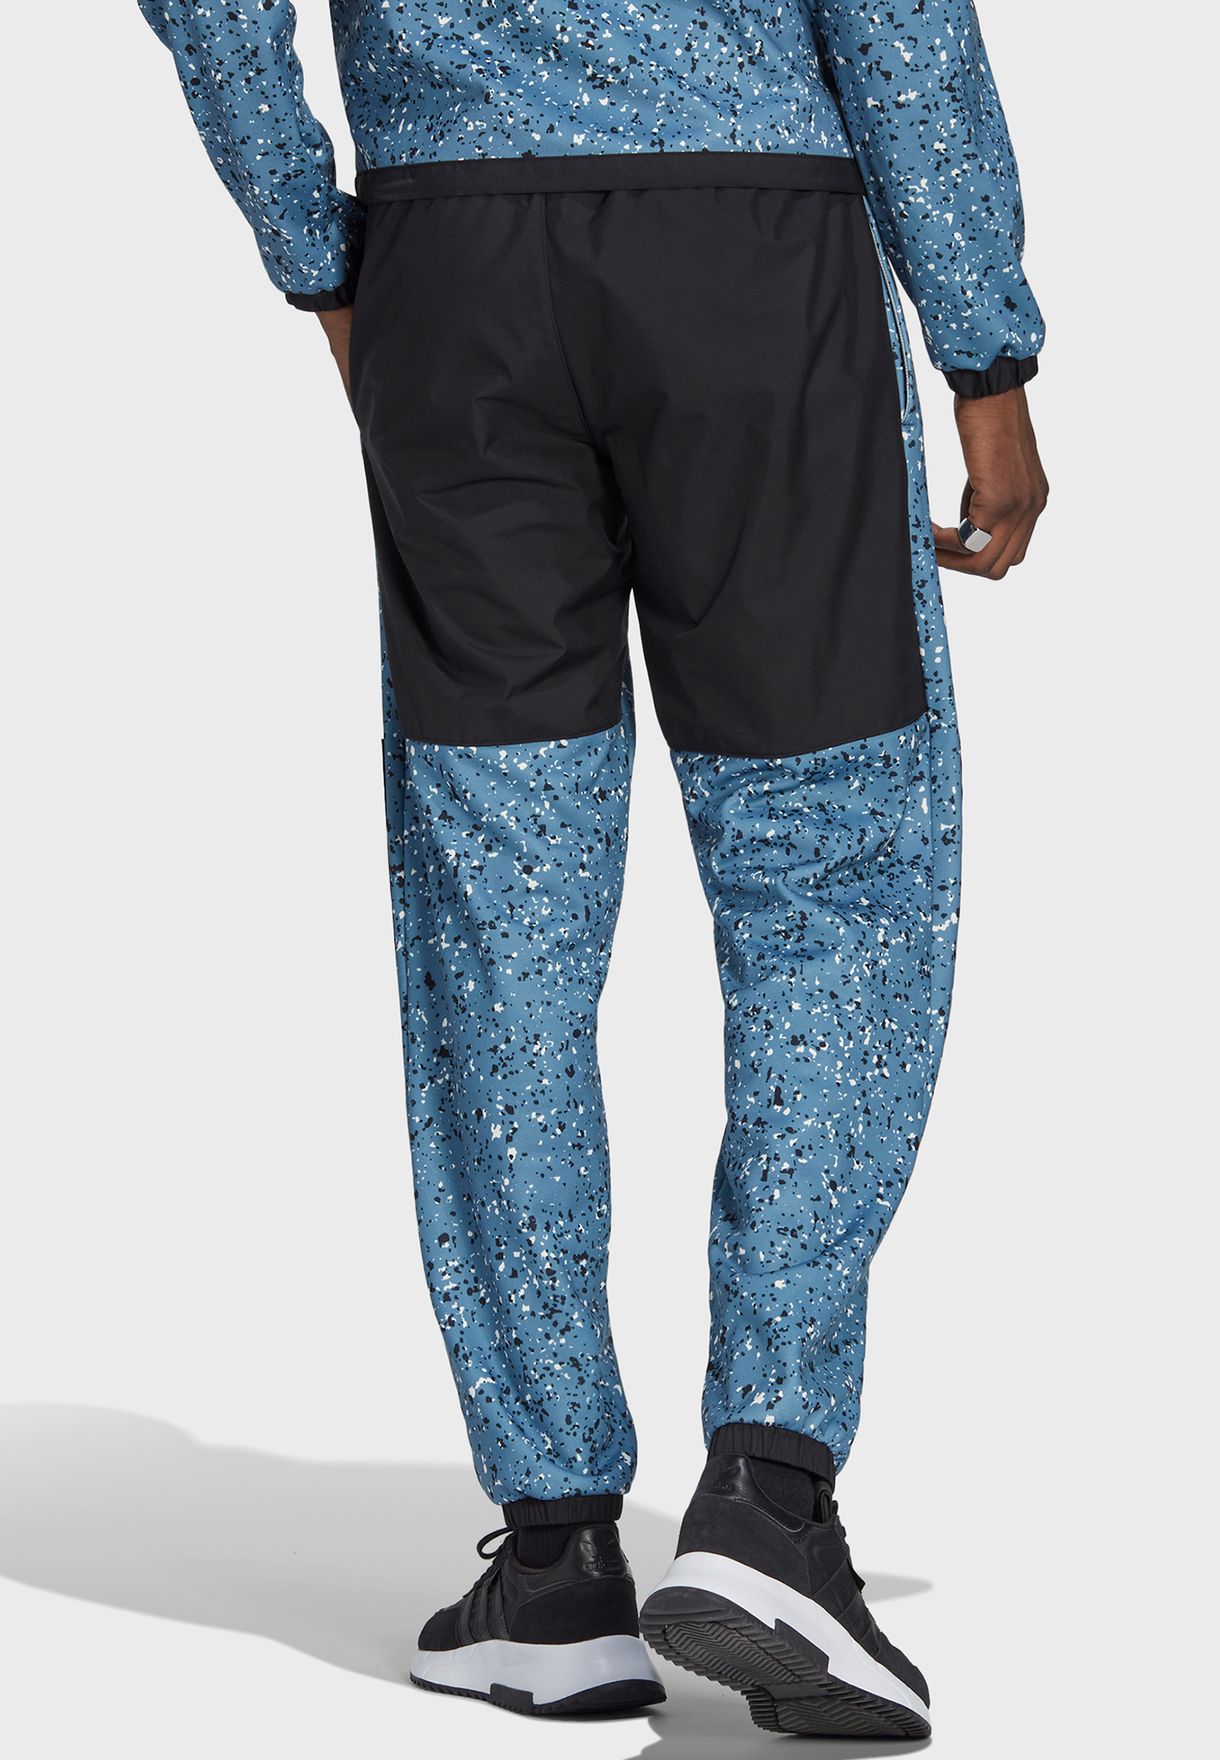 Adventure Winter All Over Printed Sweatpants